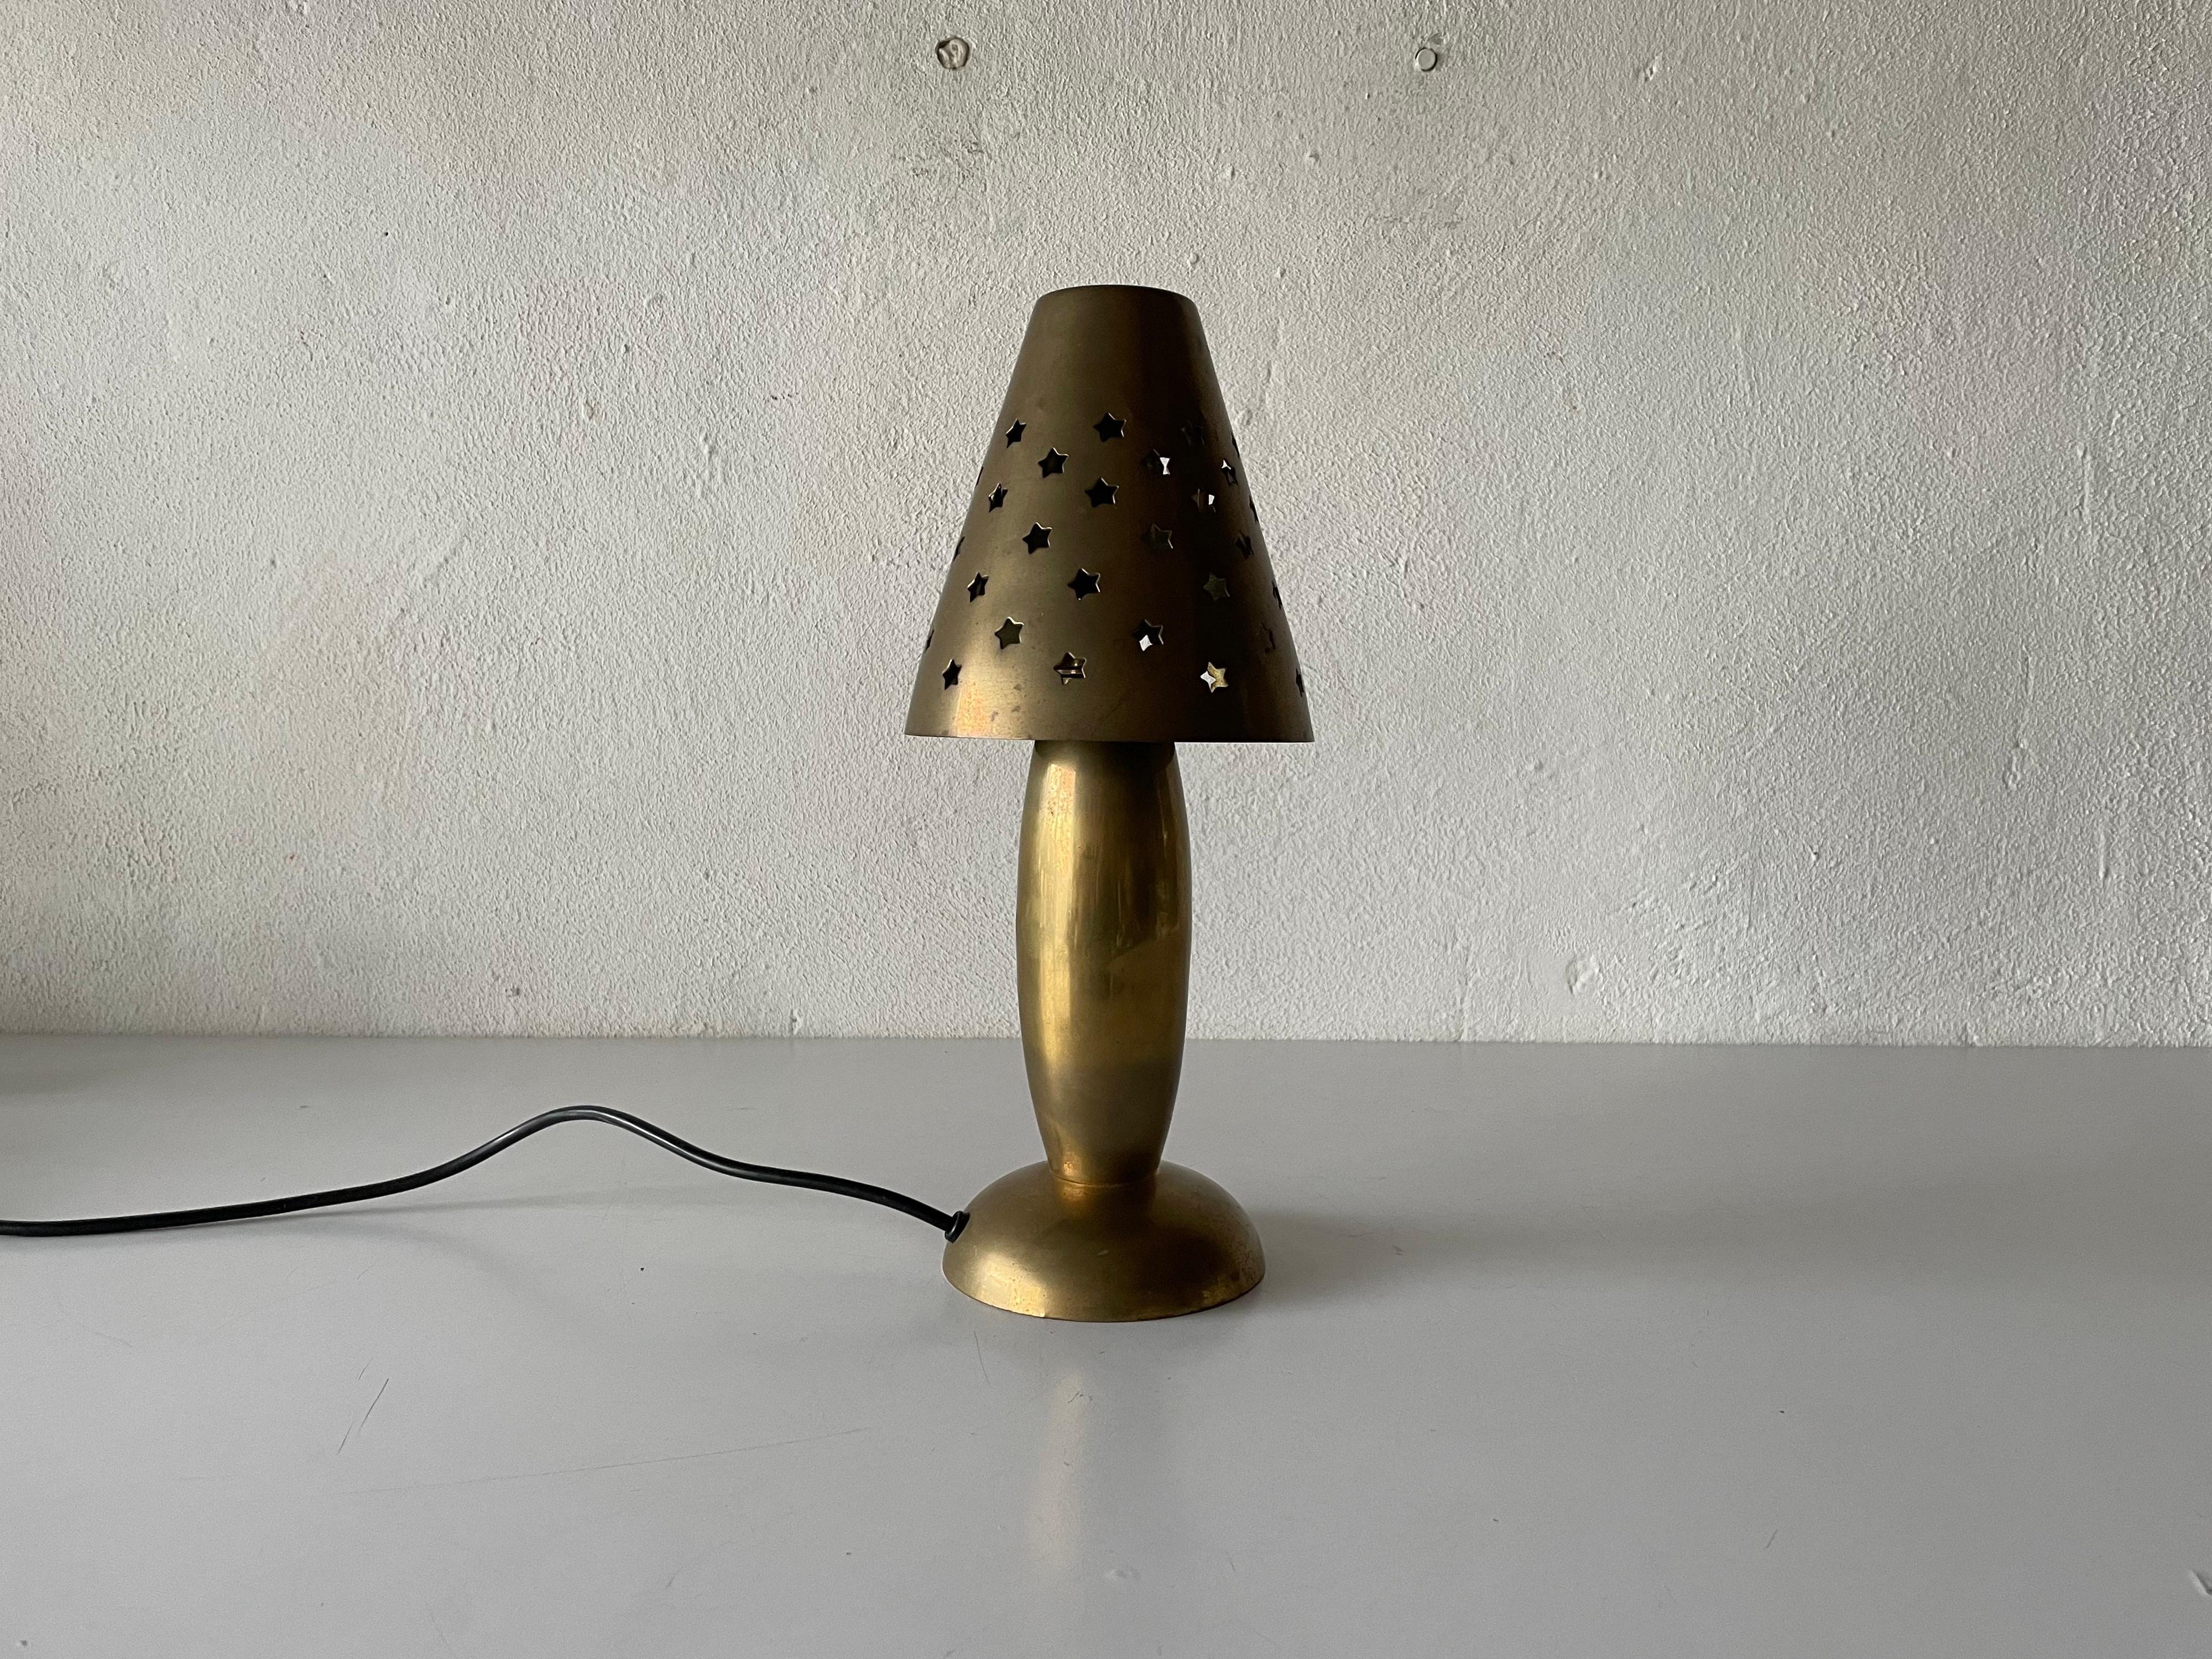 Heavy full brass Mid-Century Modern table lamp by Gunther Lambert Collection, 1960, Germany 

Very high quality.
Fully functional.
Original cable and plug. This lamp is suitable for EU plug socket. Switch on/off on the cable.
Lamp is in very